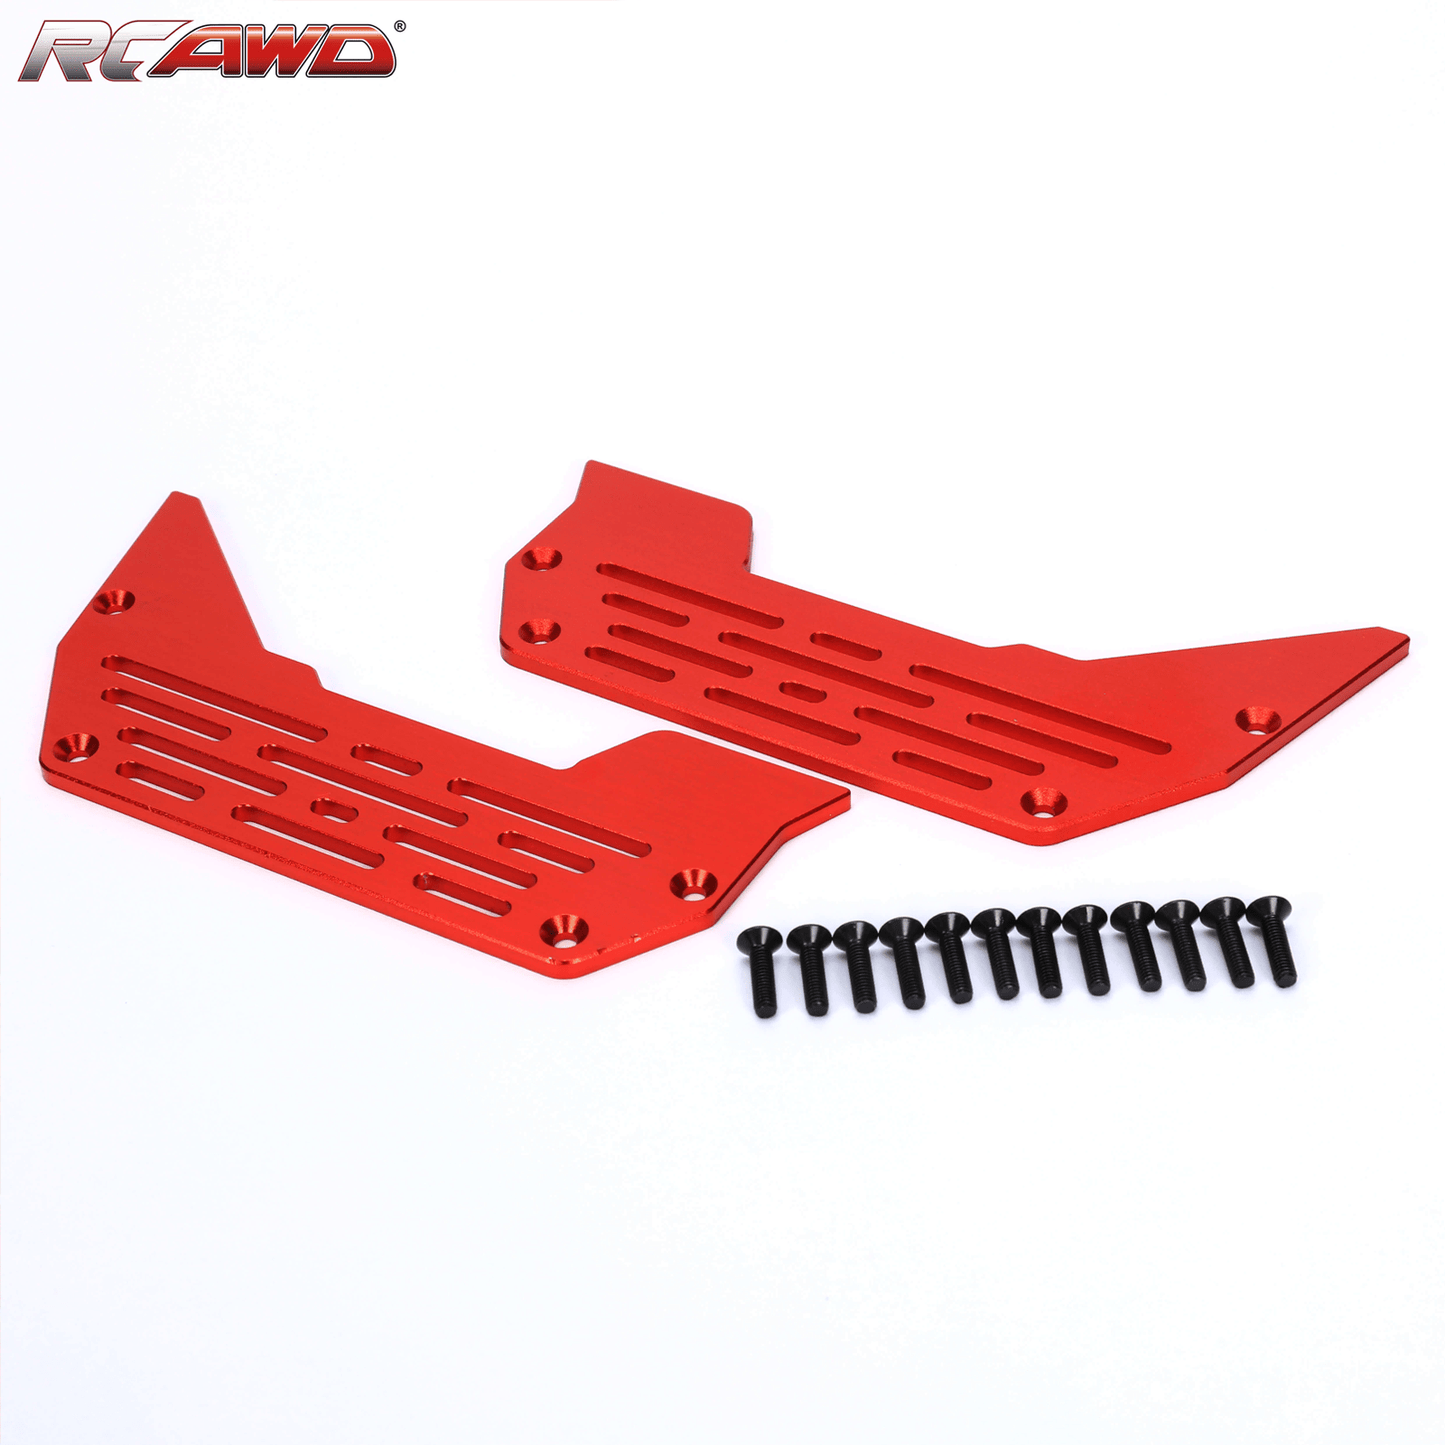 RCAWD ARRMA 6S Red RCAWD Arrma 6s Limitless Upgrades Side Skirt Set R-ARA320509